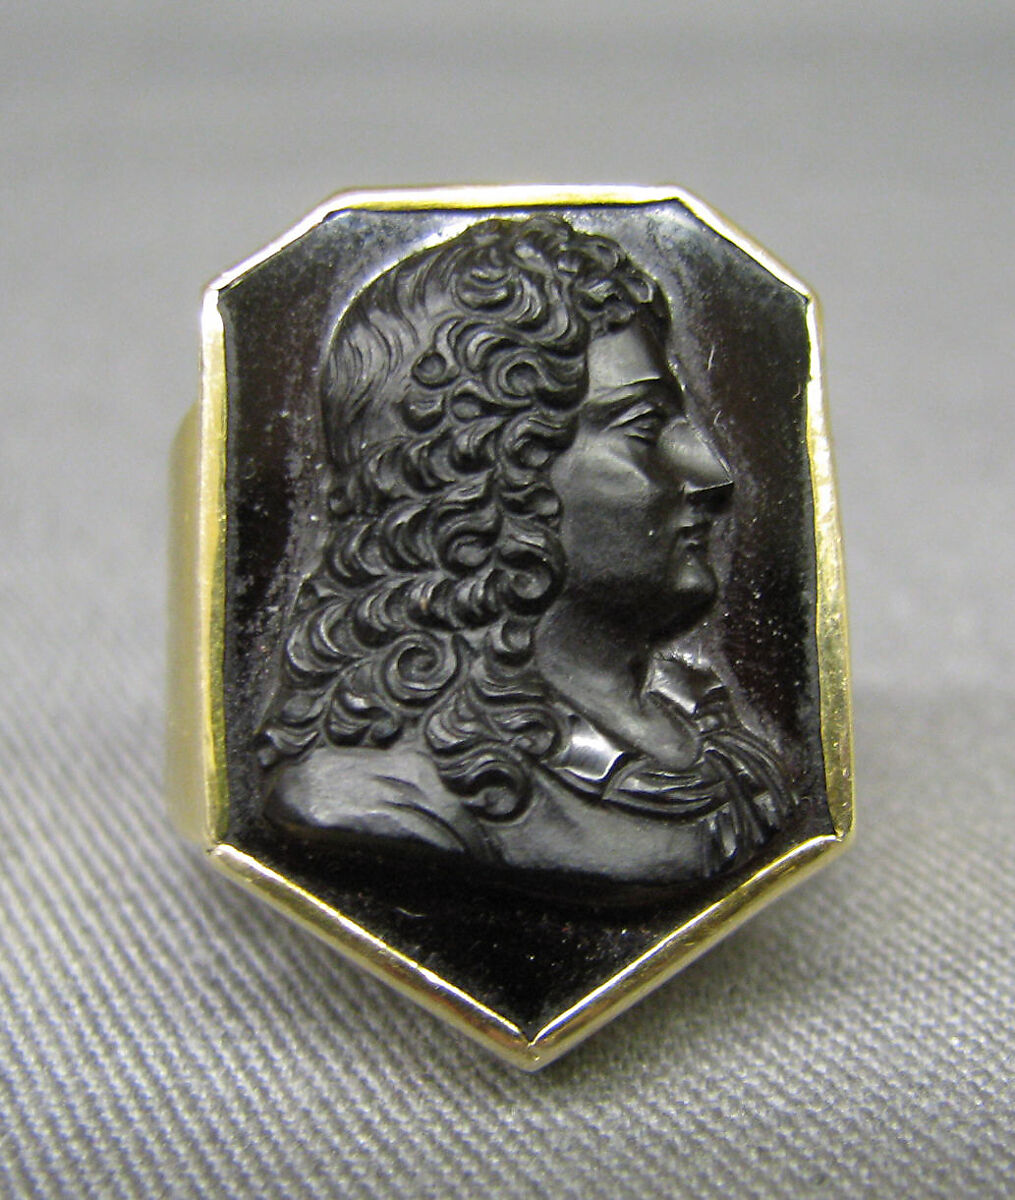 Bust of a man in a wig, possibly a writer, Sardonyx, mounted in gold as a ring, probably French 